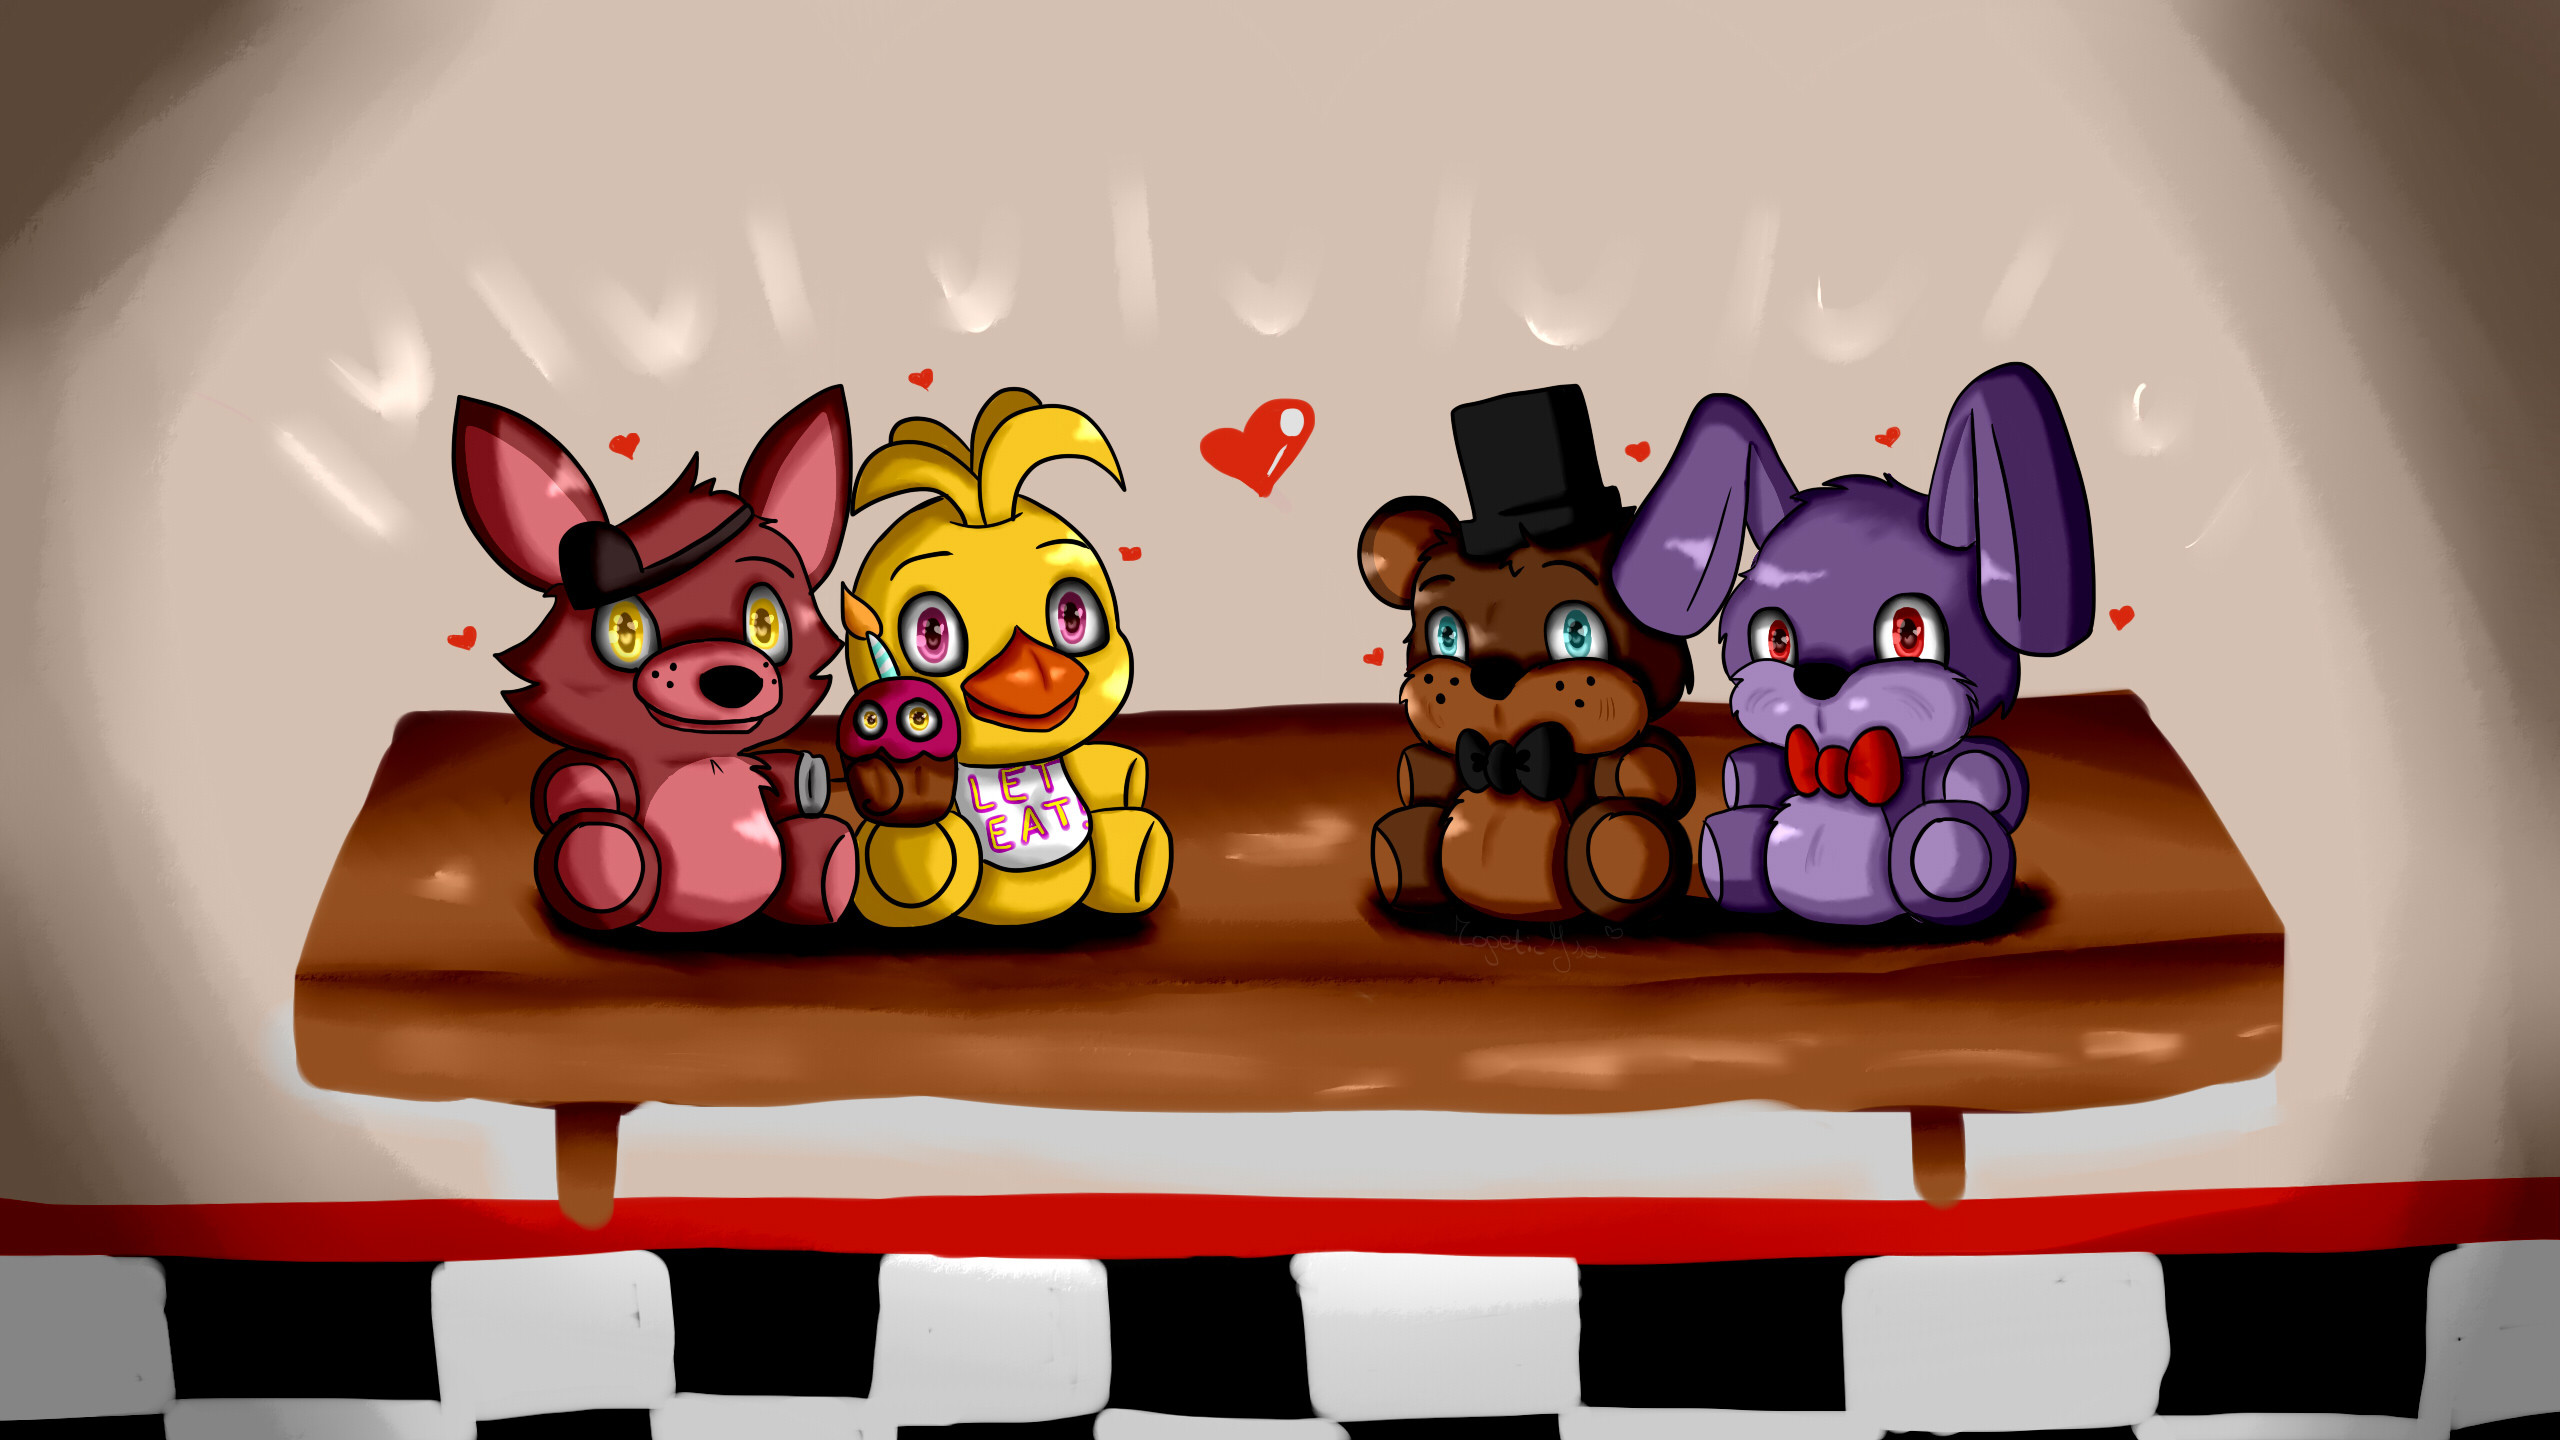 Five Nights at Freddys Fnaf Wallpapers.